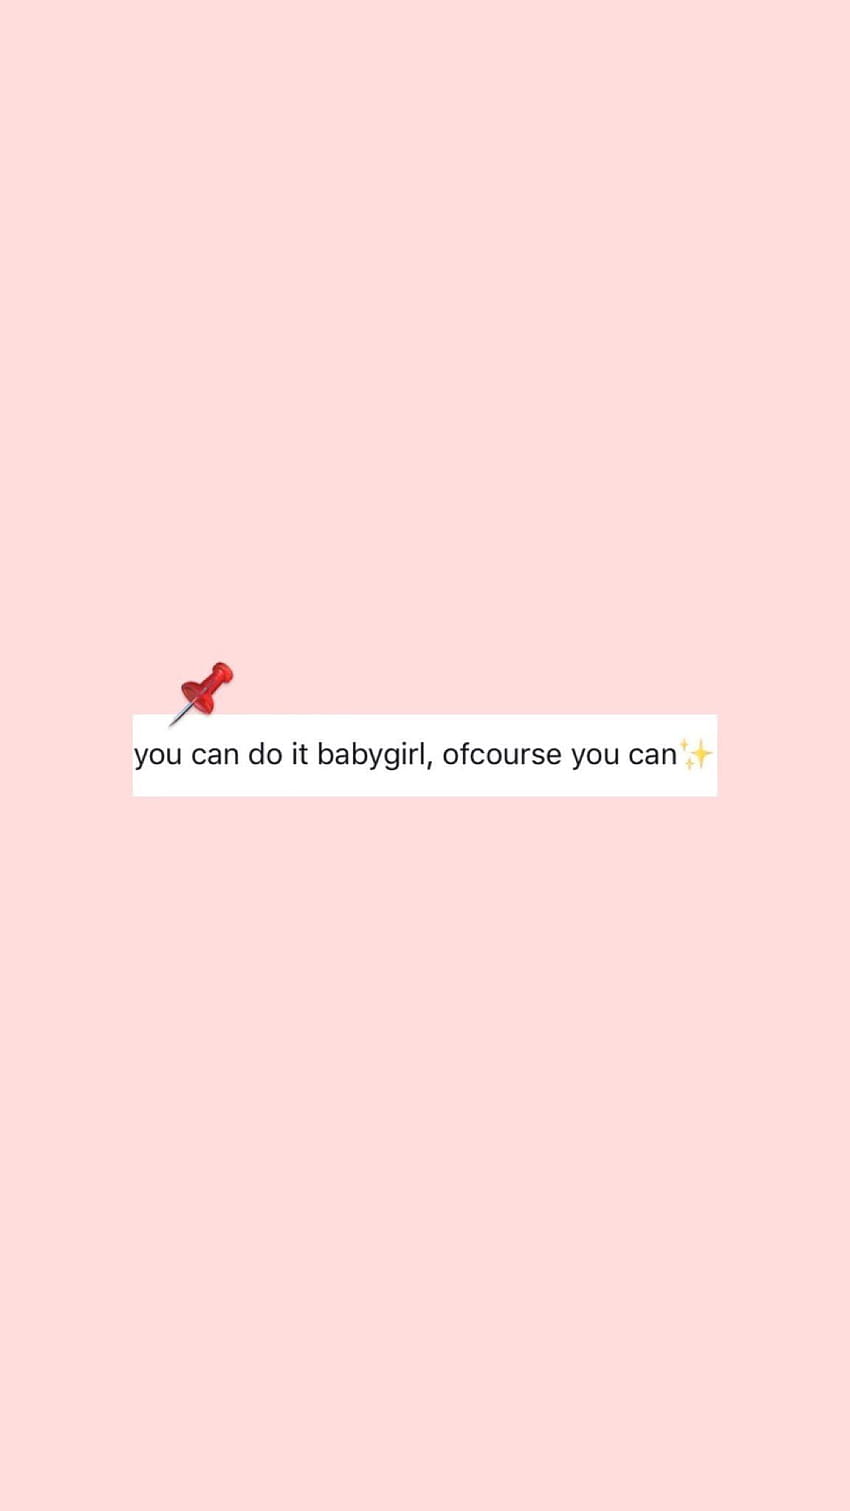 You can do it babygirl. Of course you can. HD phone wallpaper